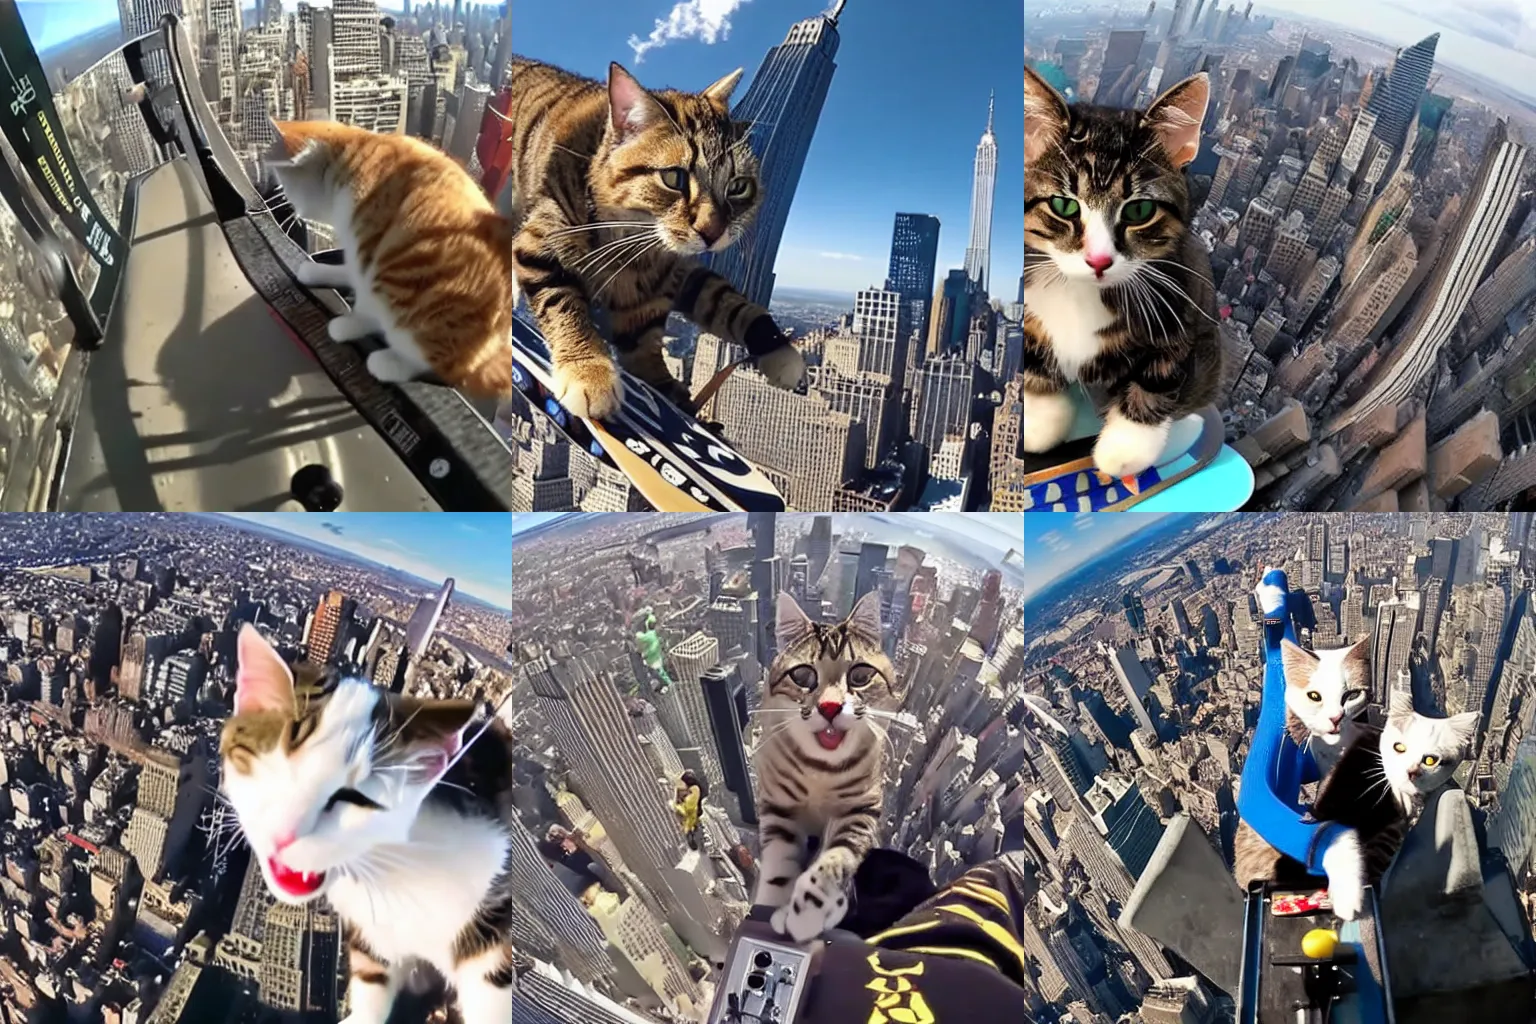 Prompt: GoPro footage of cats doing sick skateboard tricks on the empire state building